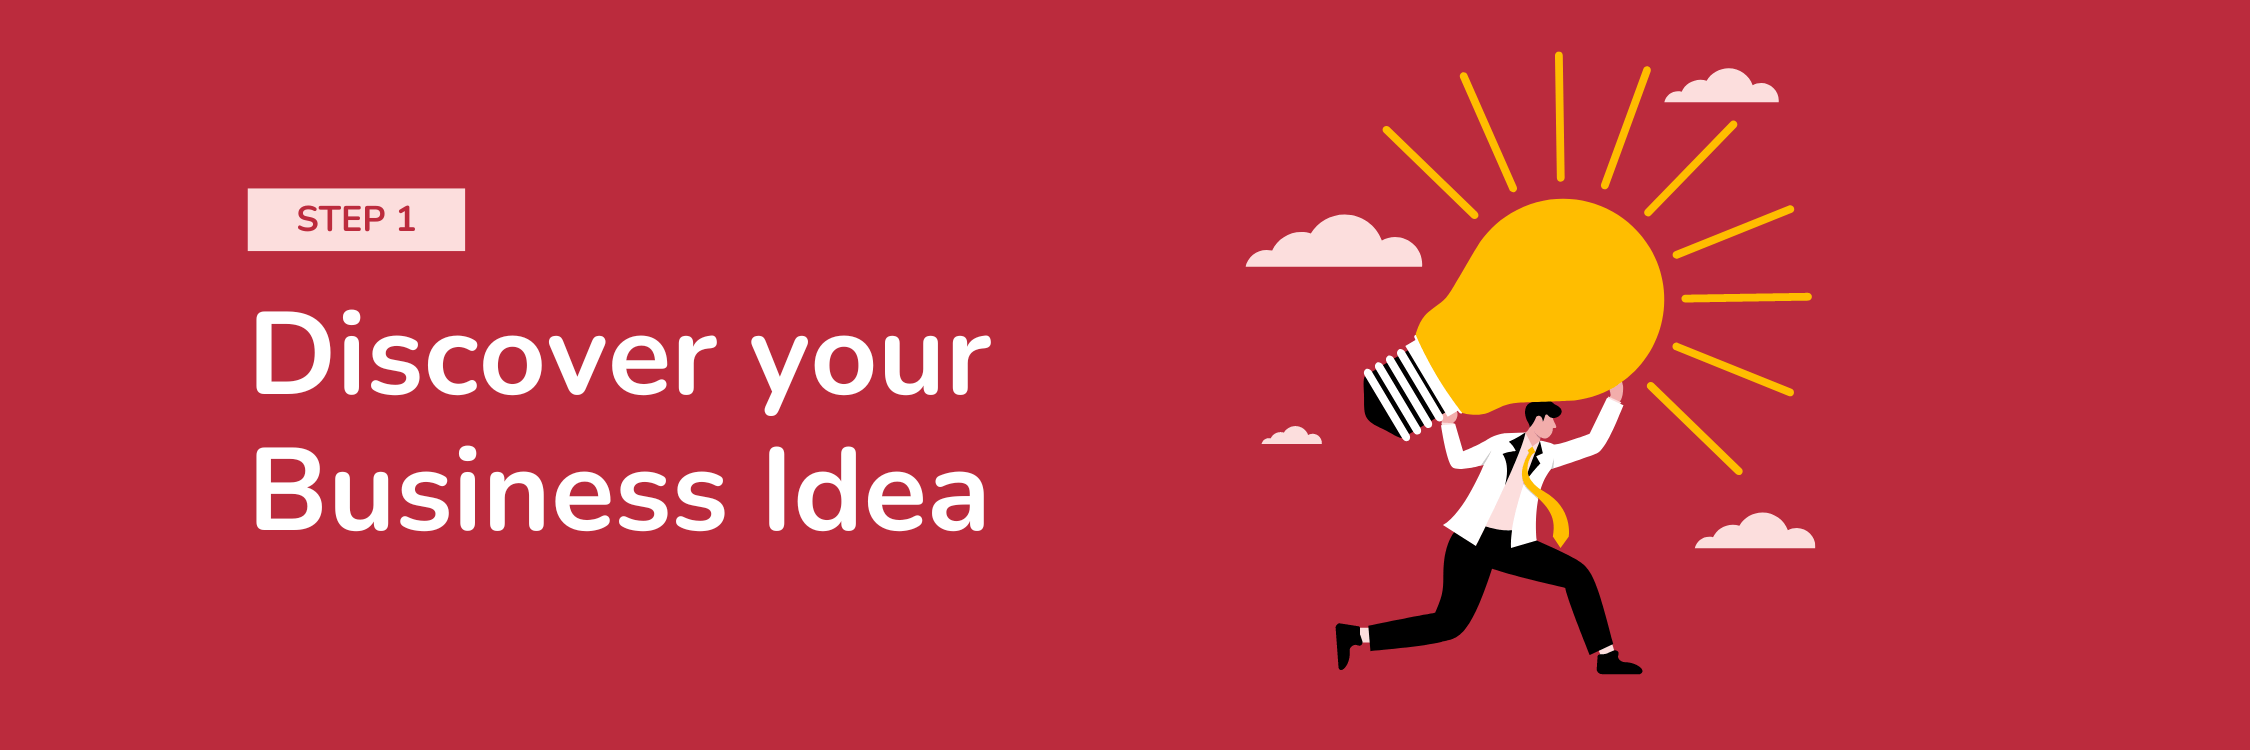 Step 1: Discover Your Business Idea